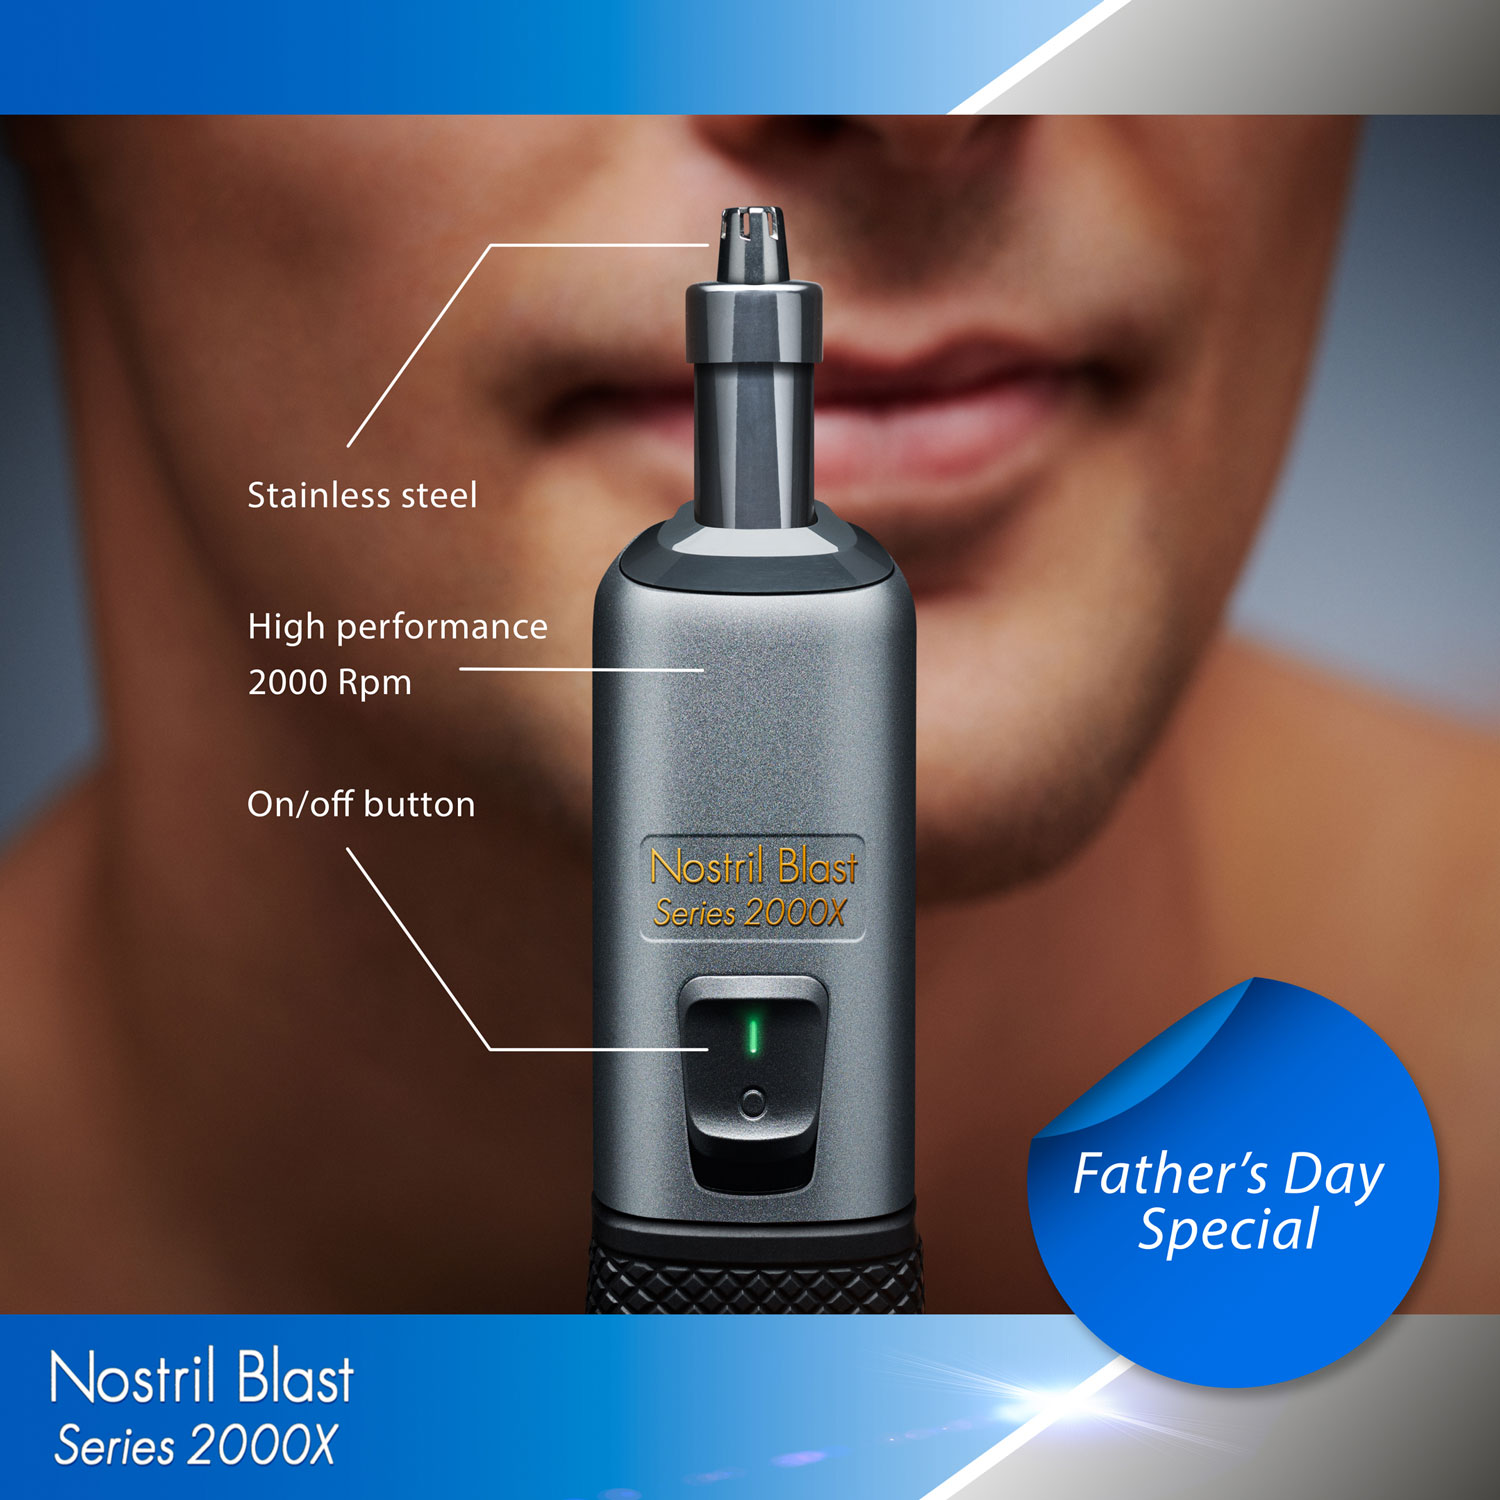 Absolut_Fathers_Day_Grey_Master_Square